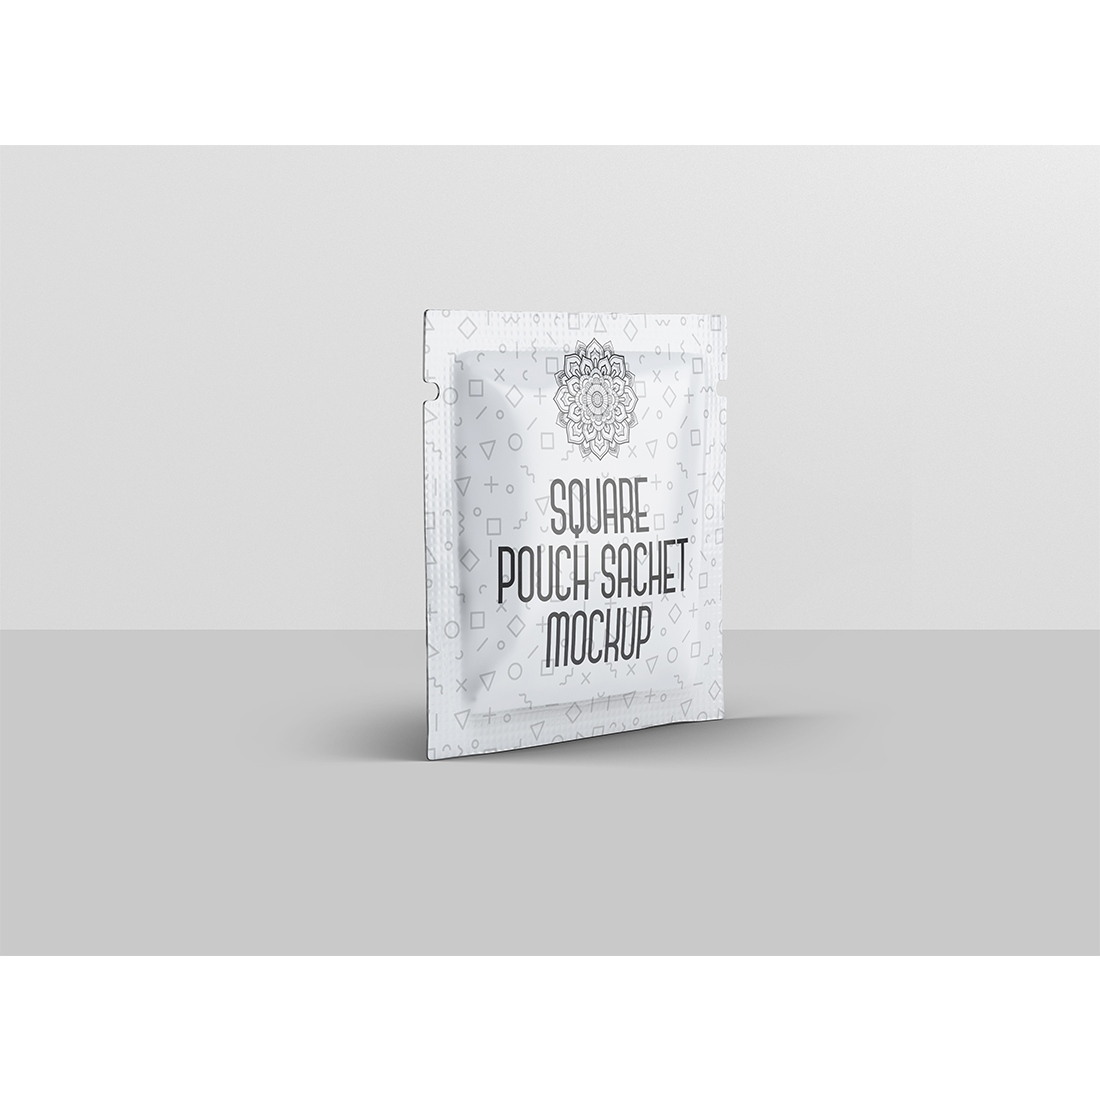 Square Pouch Sachet Mockup preview image.